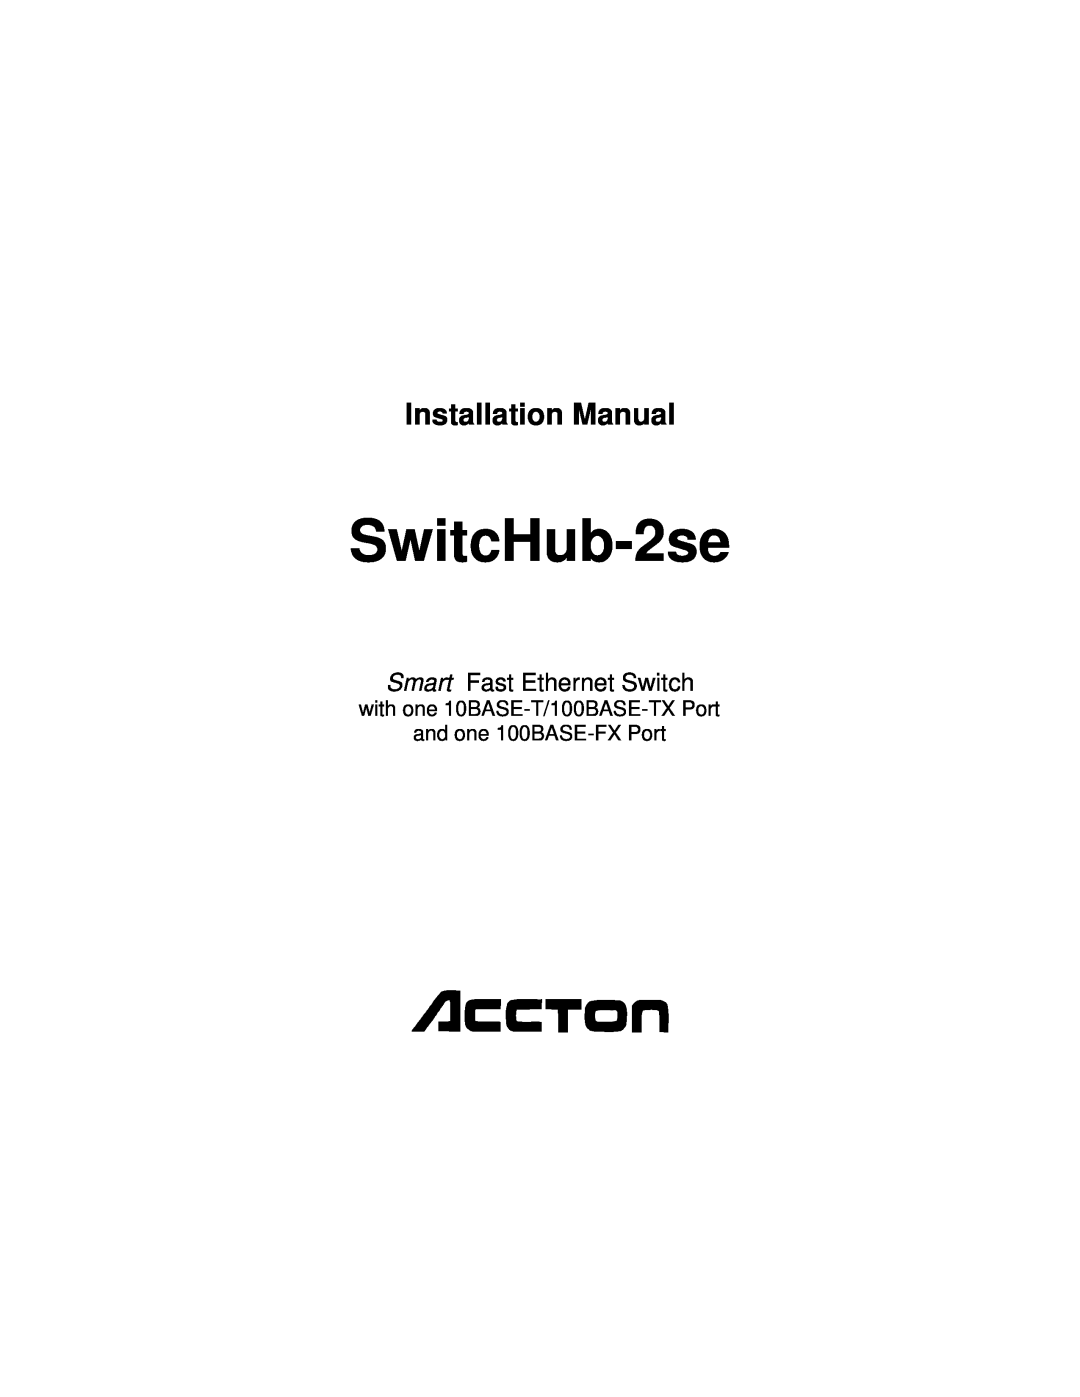 Accton Technology ES3002-TF manual SwitcHub-2se, Installation Manual, Smart Fast Ethernet Switch 